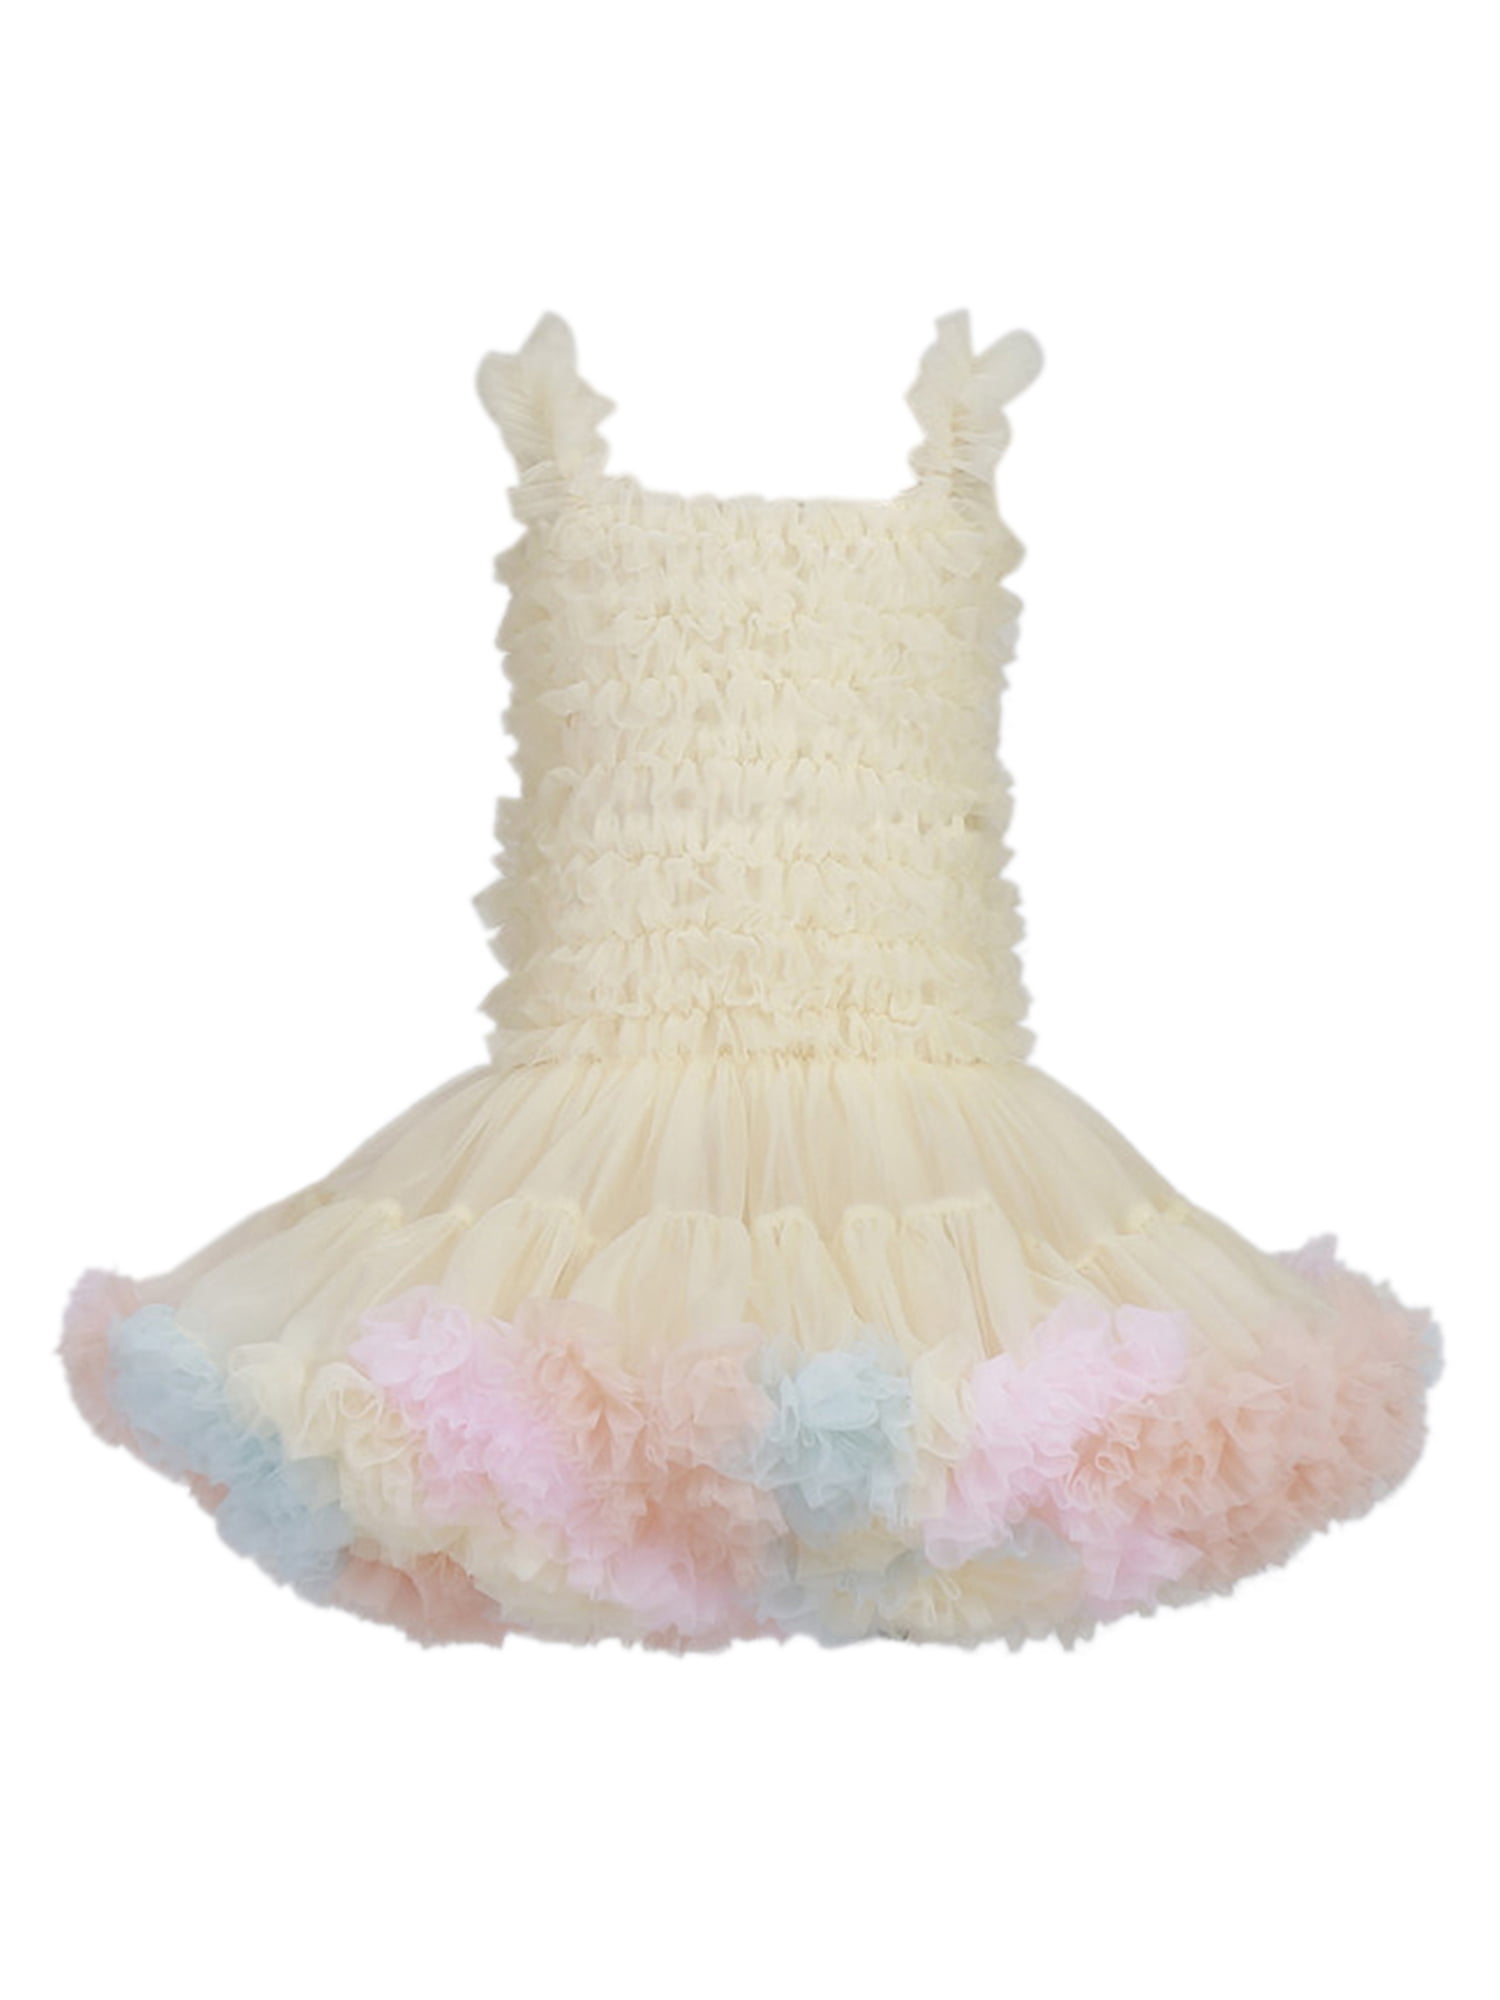 Details about   Kid Flower Girl Tulle Tutu Dress Pageant Princess Wedding Bridesmaid Party Dress 